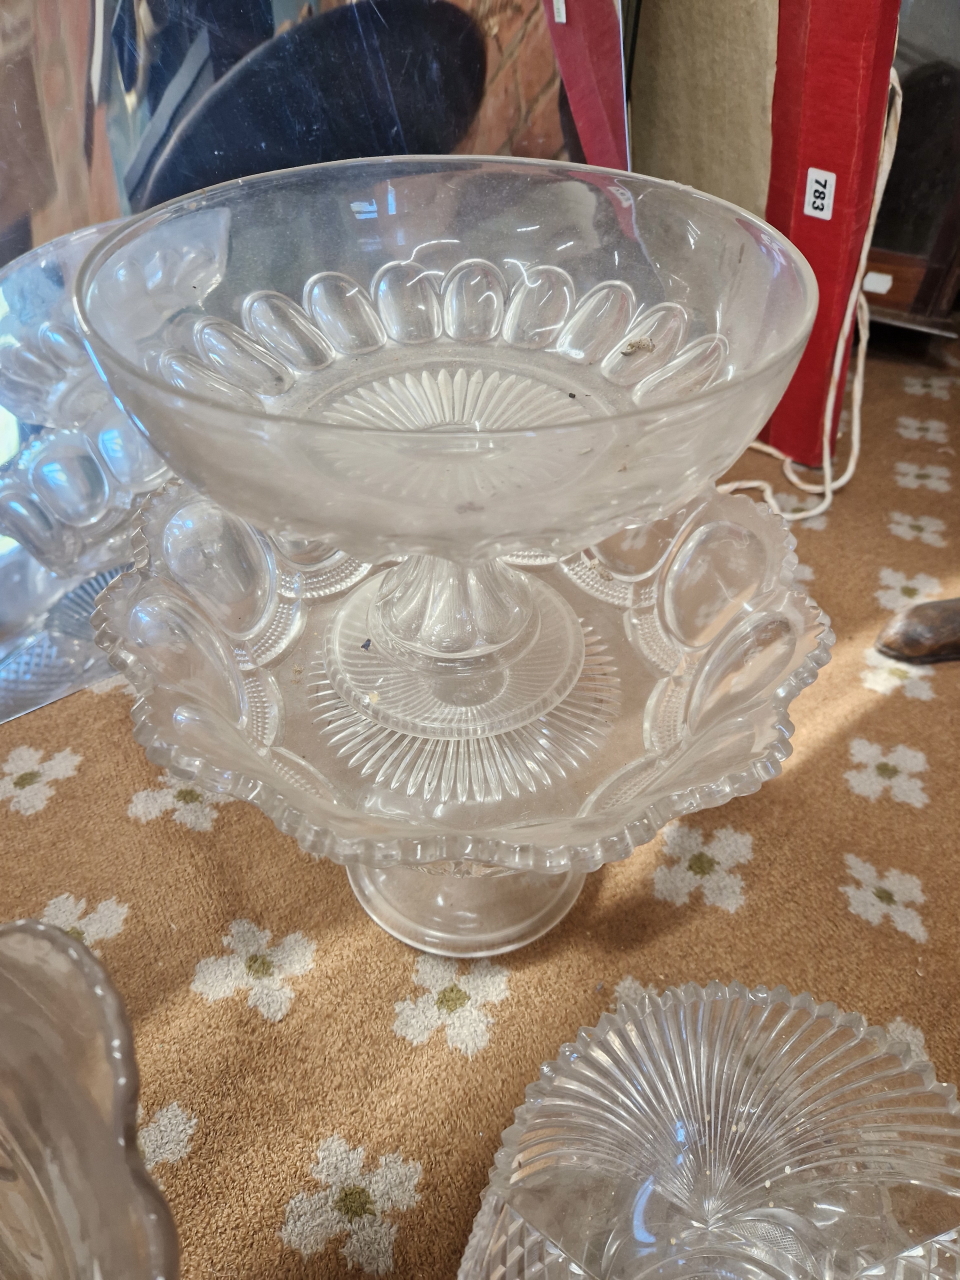 SIX CLEAR GLASS FOOTED BOWLS TOGETHER WITH A CUT GLASS OVAL BOWL AND STAND WITH FAN SHAPED HANDLES - Image 5 of 5